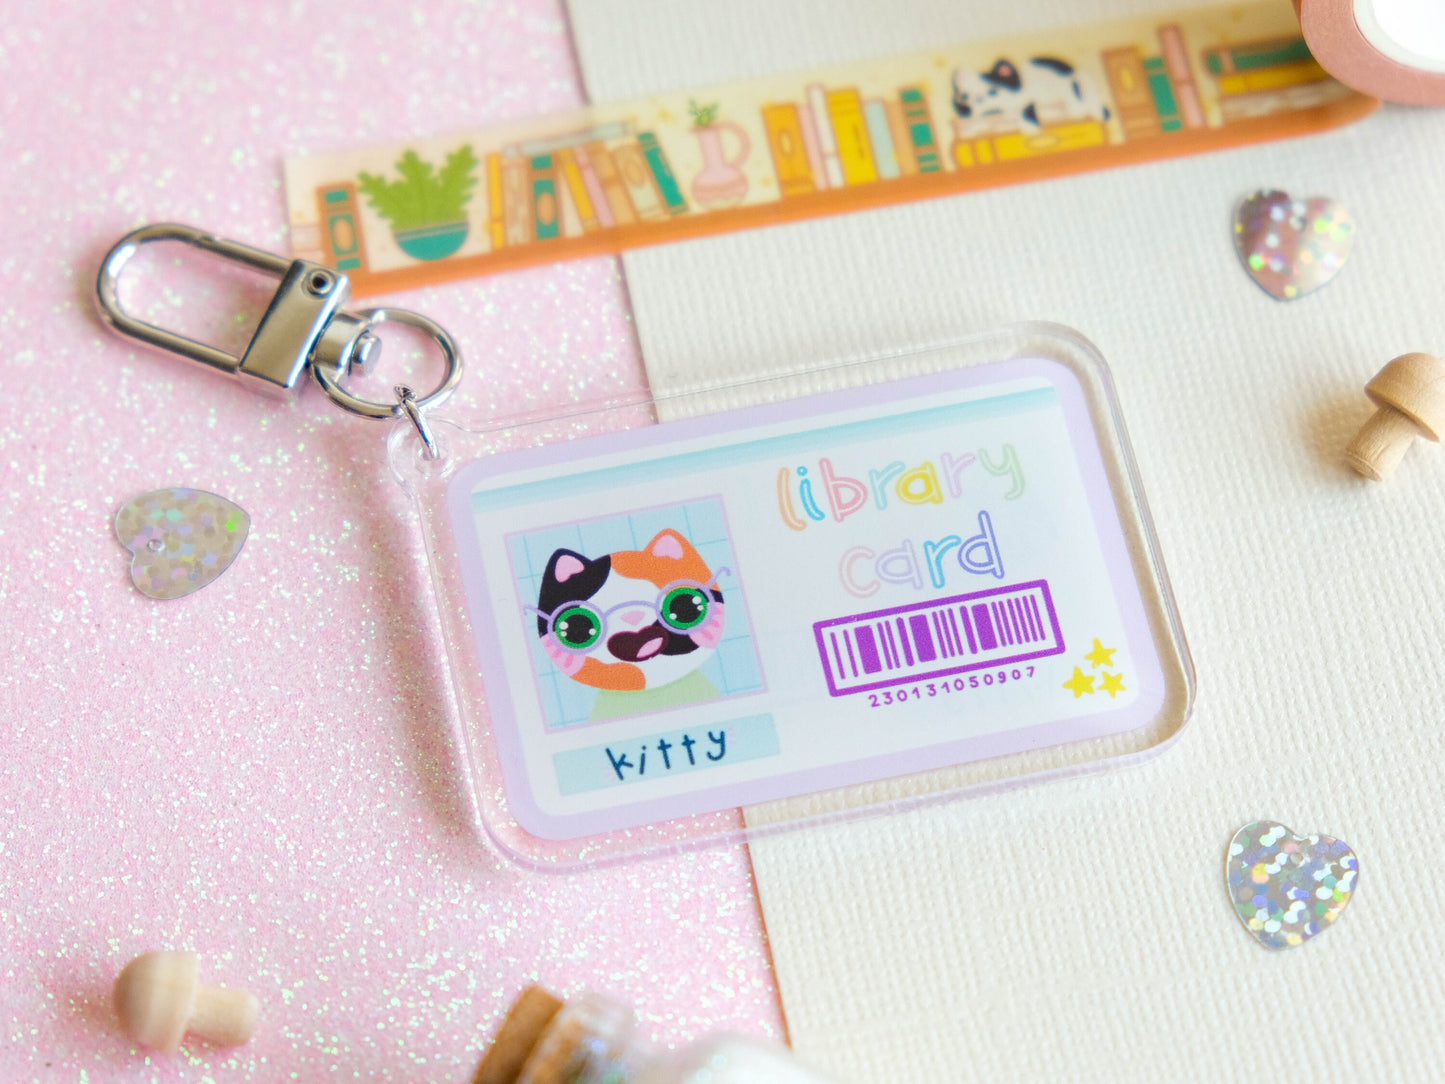 Keychain multicolored double-sided library card for book lovers and bookworm perfect for adding a touch of kawaii to your keys, bags